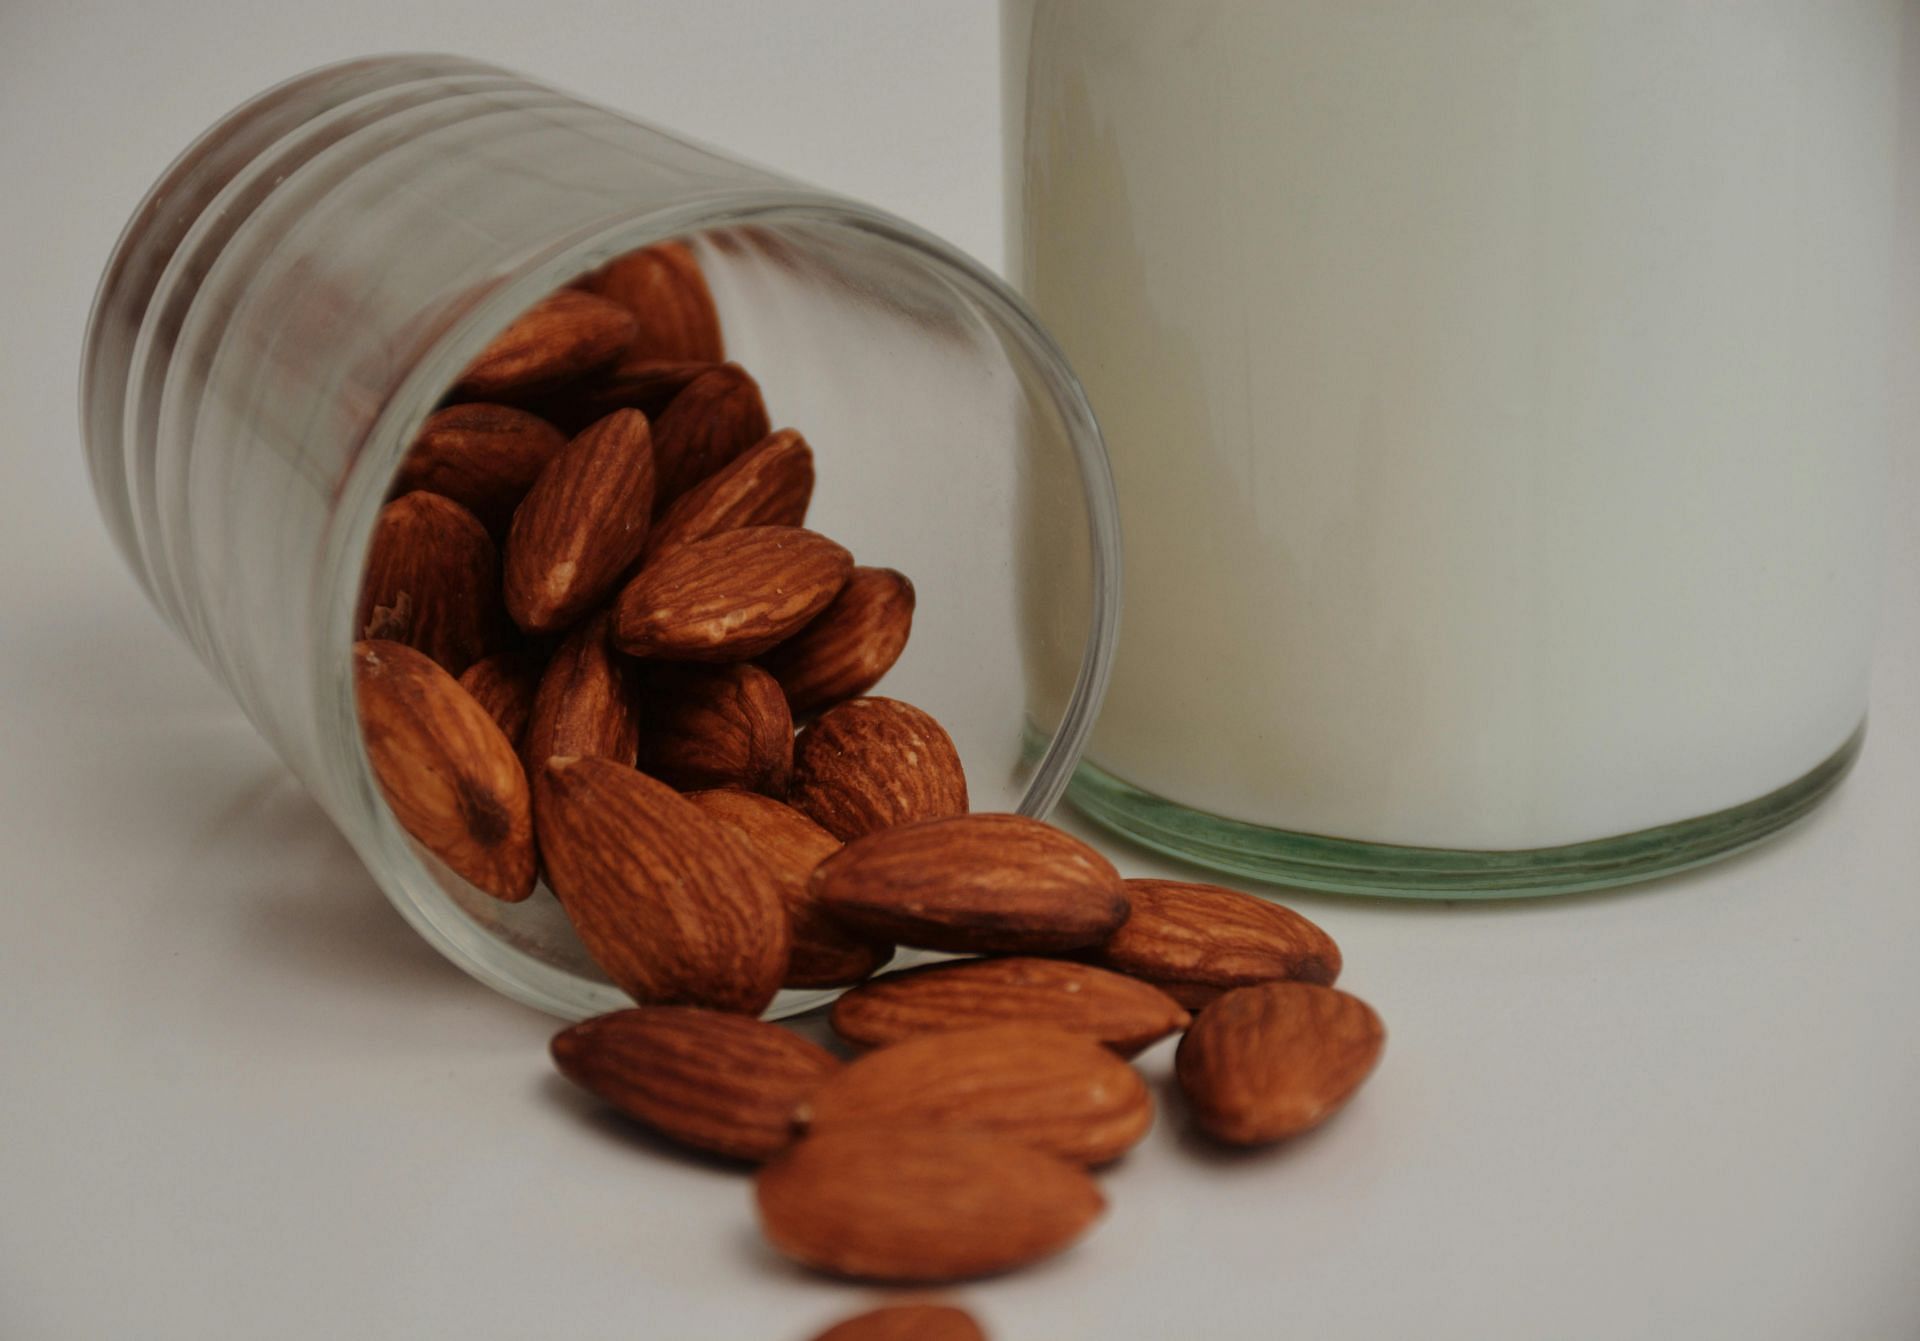 Almond milk side effects (image sourced via Pexels / Photo by pegah)